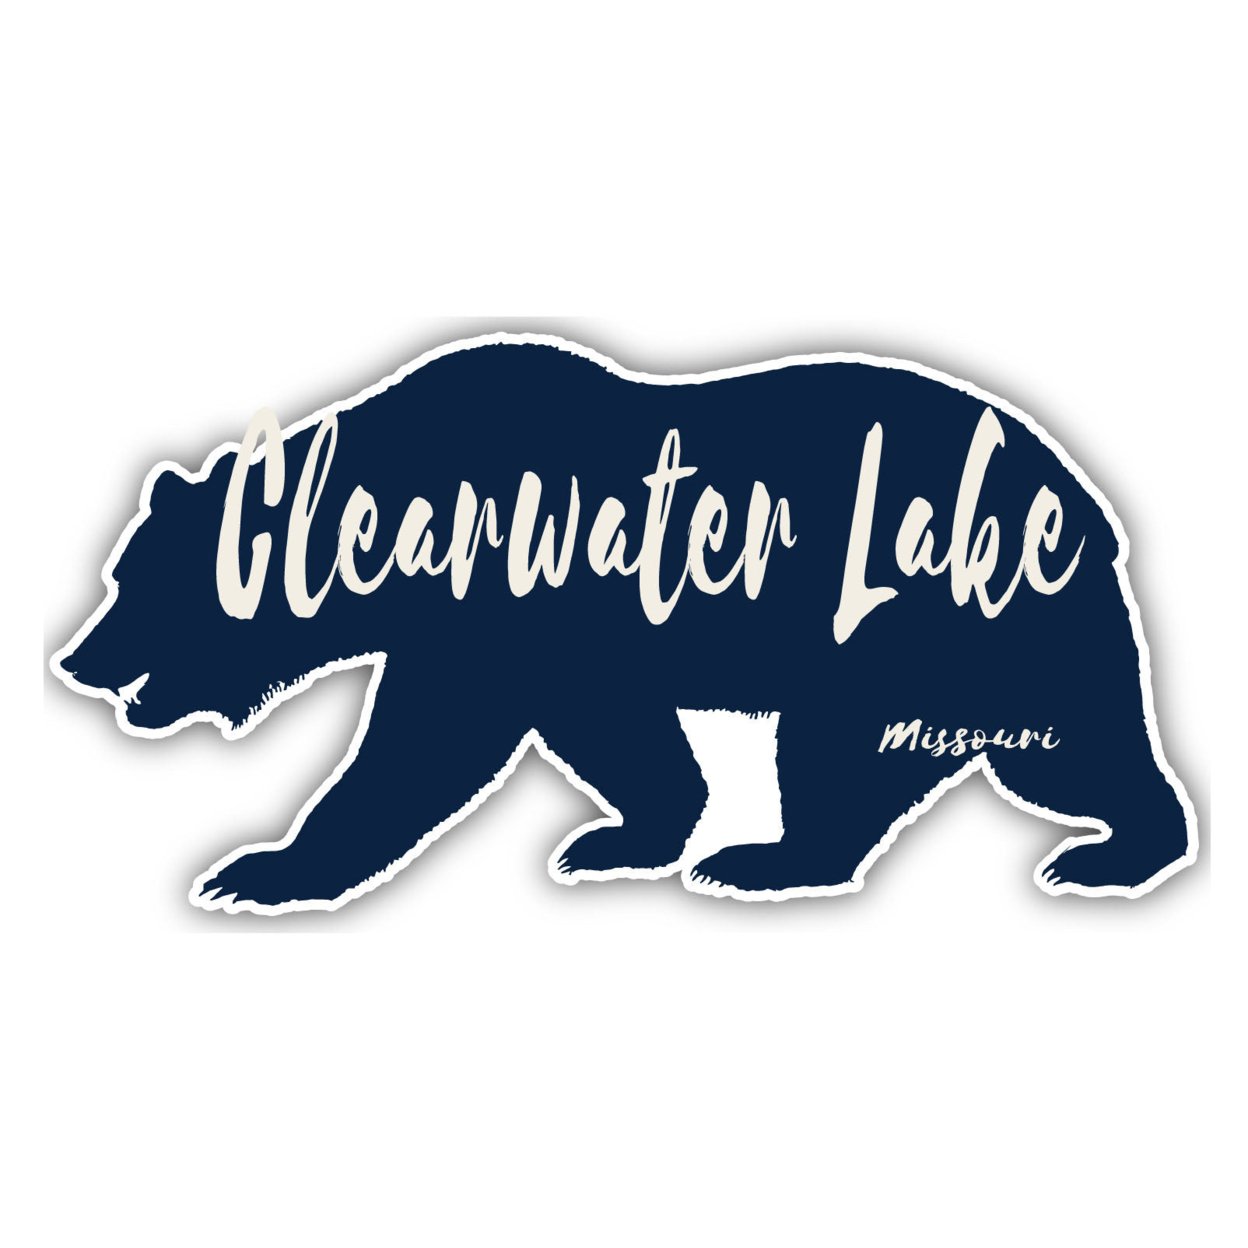 Clearwater Lake Missouri Souvenir Decorative Stickers (Choose Theme And Size) - 4-Pack, 4-Inch, Bear